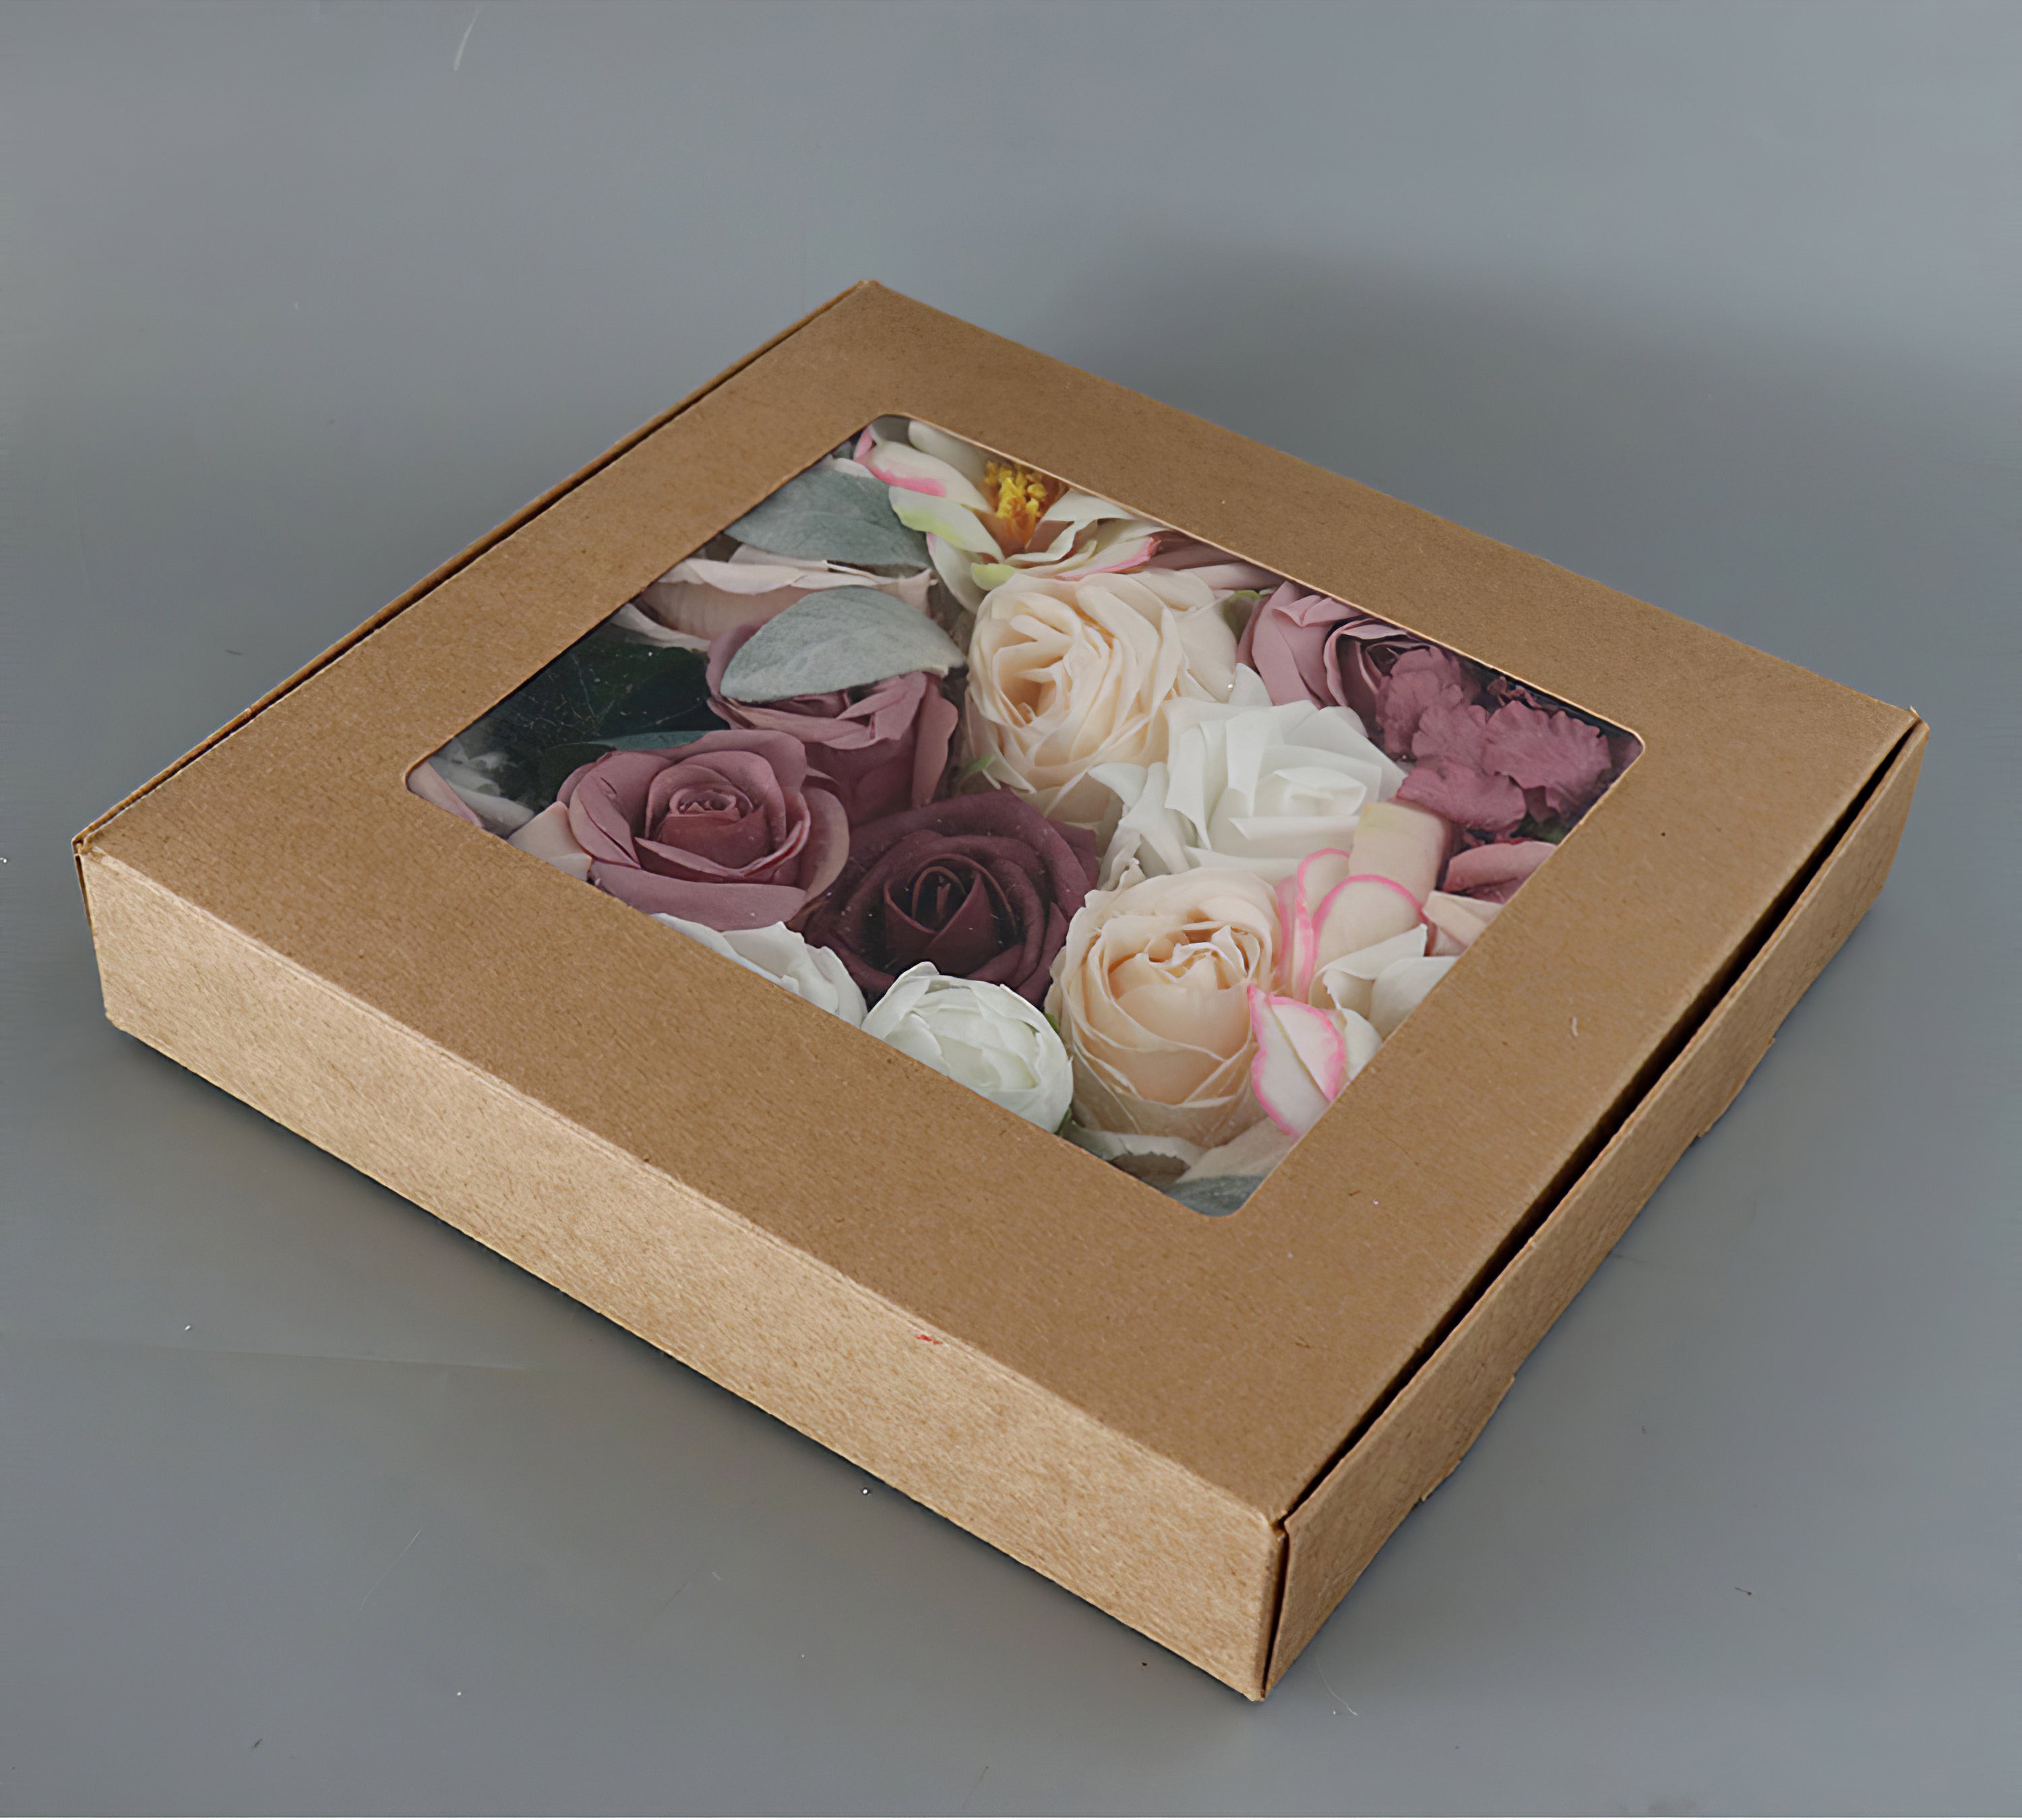 Mixed Champagne Roses Flower Box Silk Flower for Wedding Party Decor Proposal